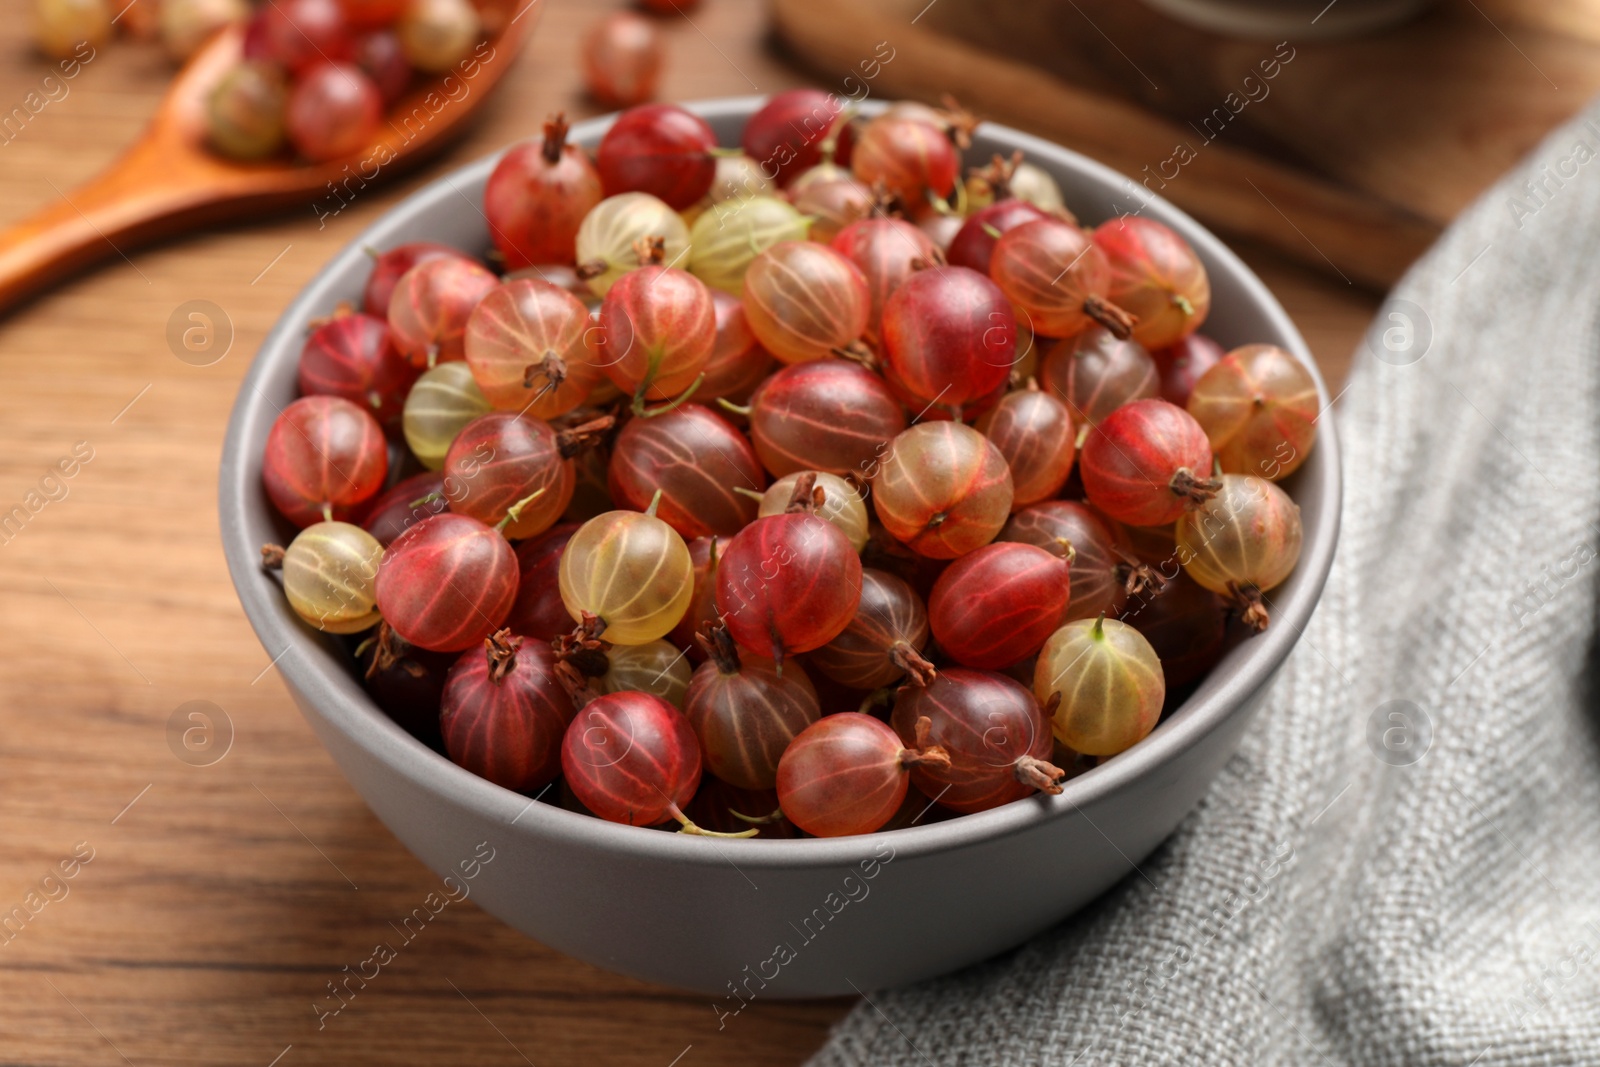 Photo of Bowl full of ripe gooseberries on wooden table, closeup